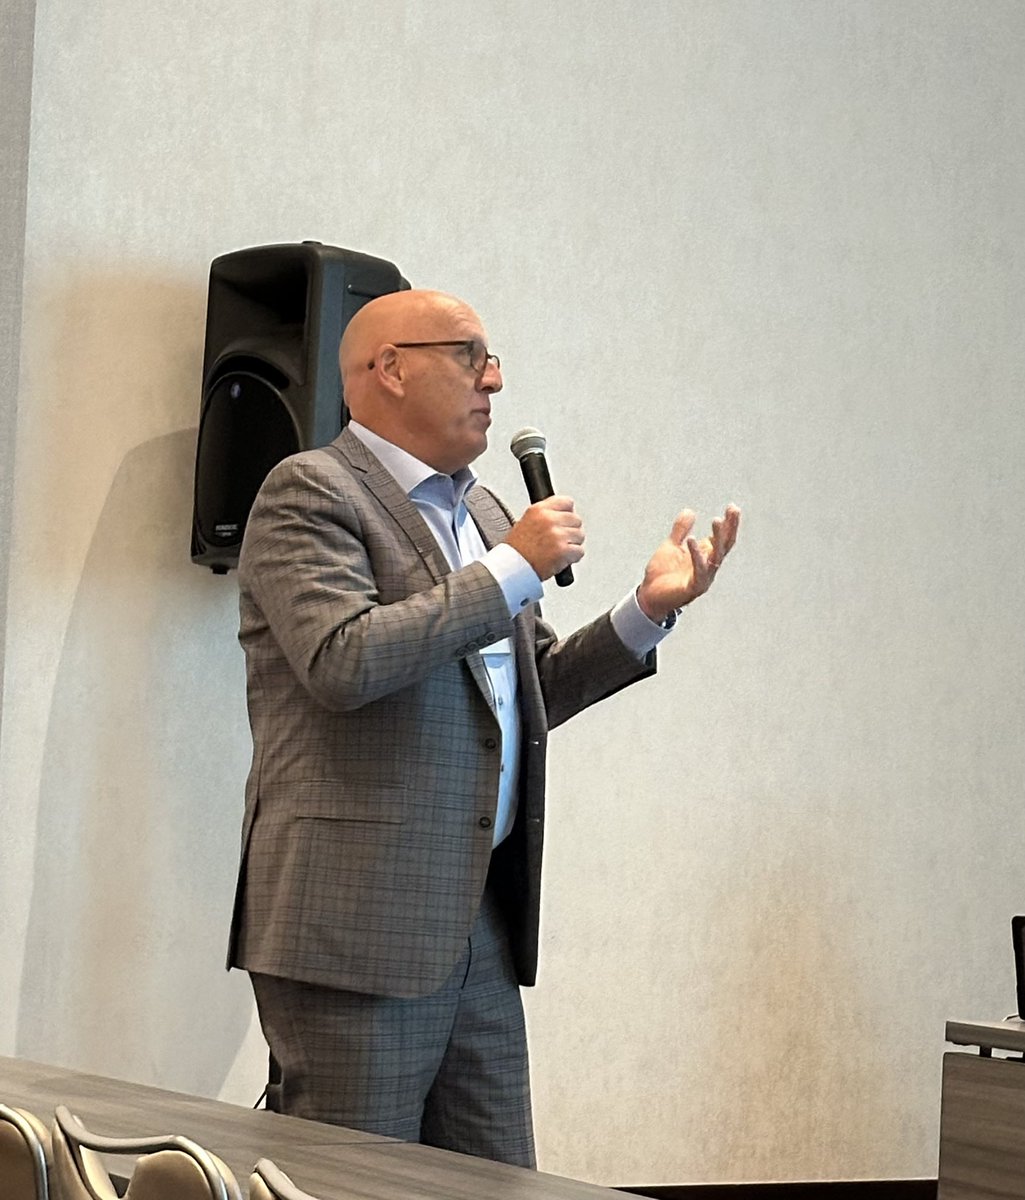 The voice of patient advocates is ESSENTIAL. @ctoddkennedy weighs in on a proposed trial design and aspects that could be tweaked to better align with patient perspectives. Thank you, Todd, for your invaluable additions to the Alliance spring myeloma meeting!